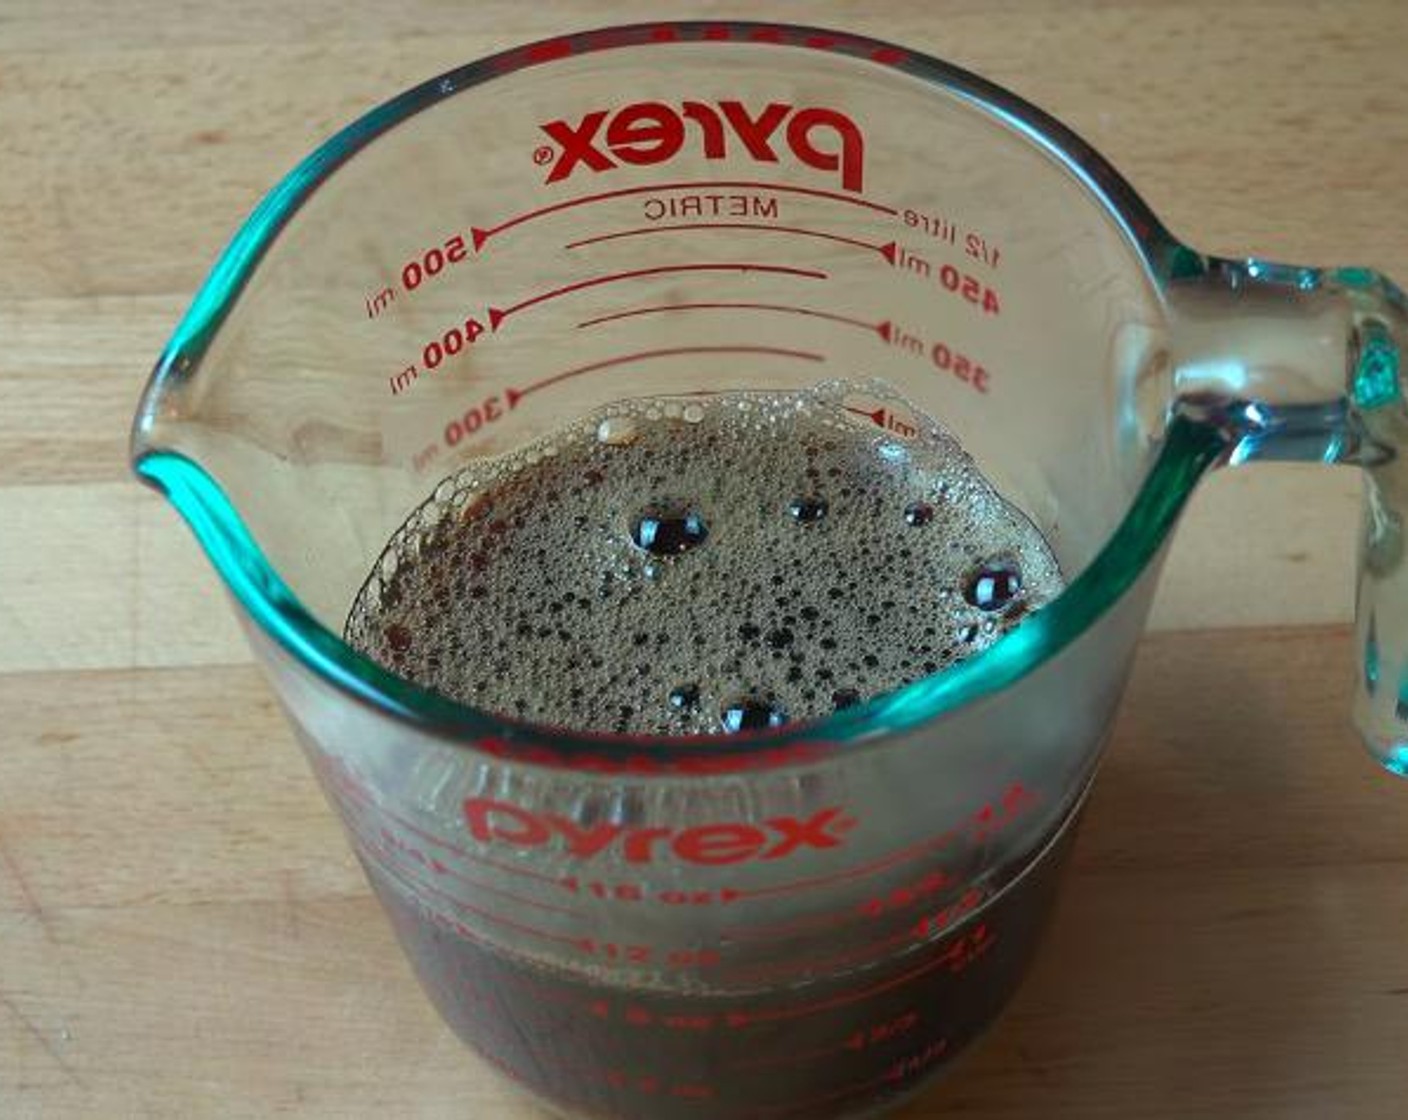 step 1 In a mixing glass, add Coffee (1 cup), half of the Powdered Confectioners Sugar (3/4 cup) and Coffee Liqueur (2 Tbsp). Stir with a spoon until combined. Reserve 3 tablespoons of the mixture for later.